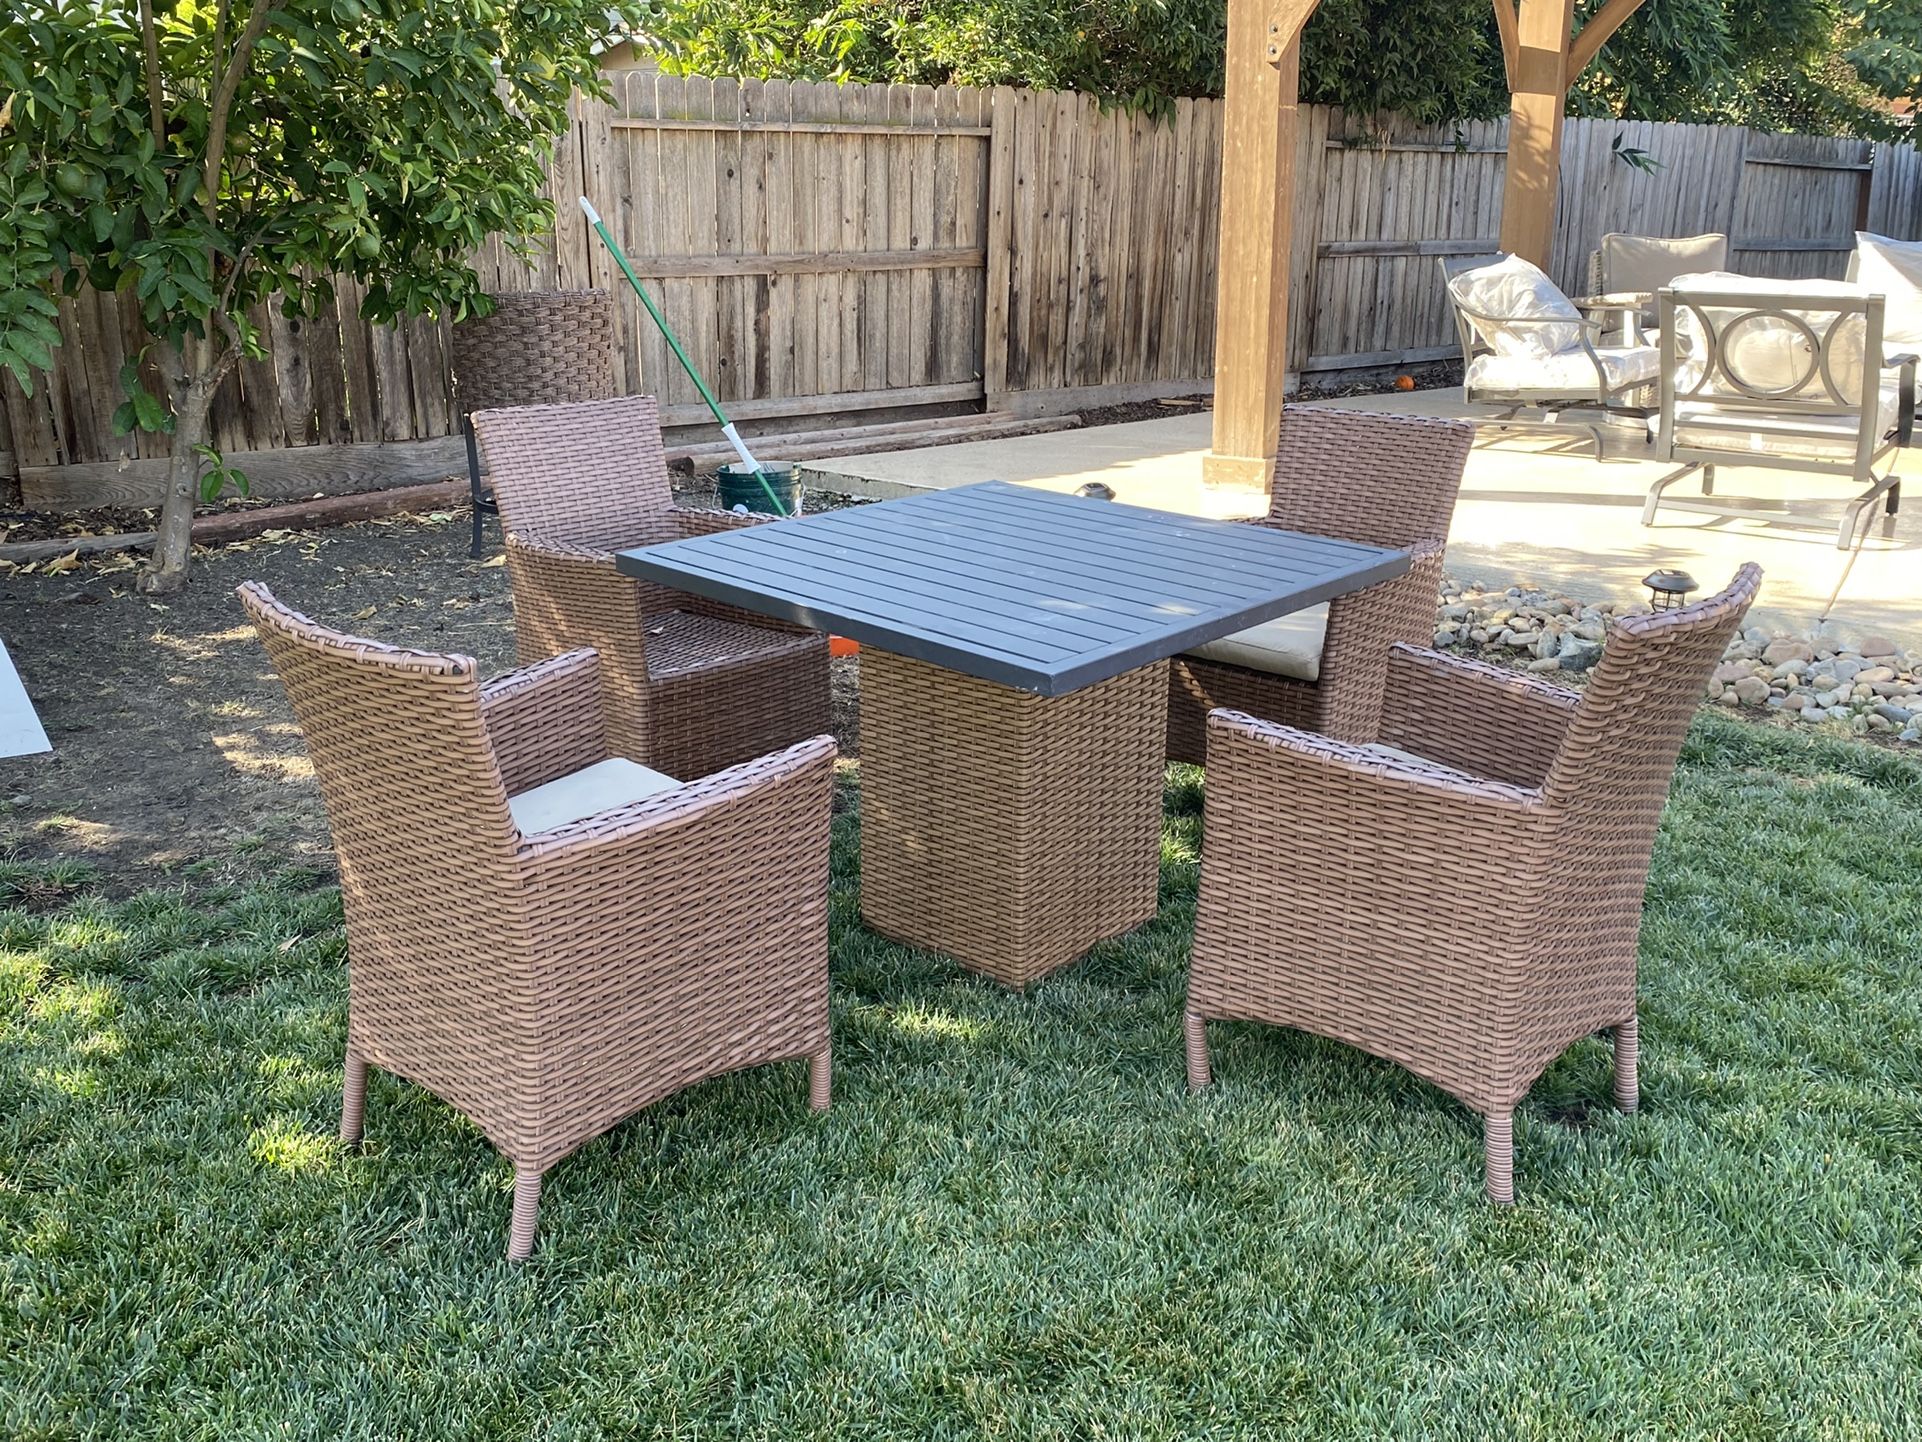 5 piece Outdoor Patio Furniture Used In Excellent Condition TODAY ONLY $250 FIRM 